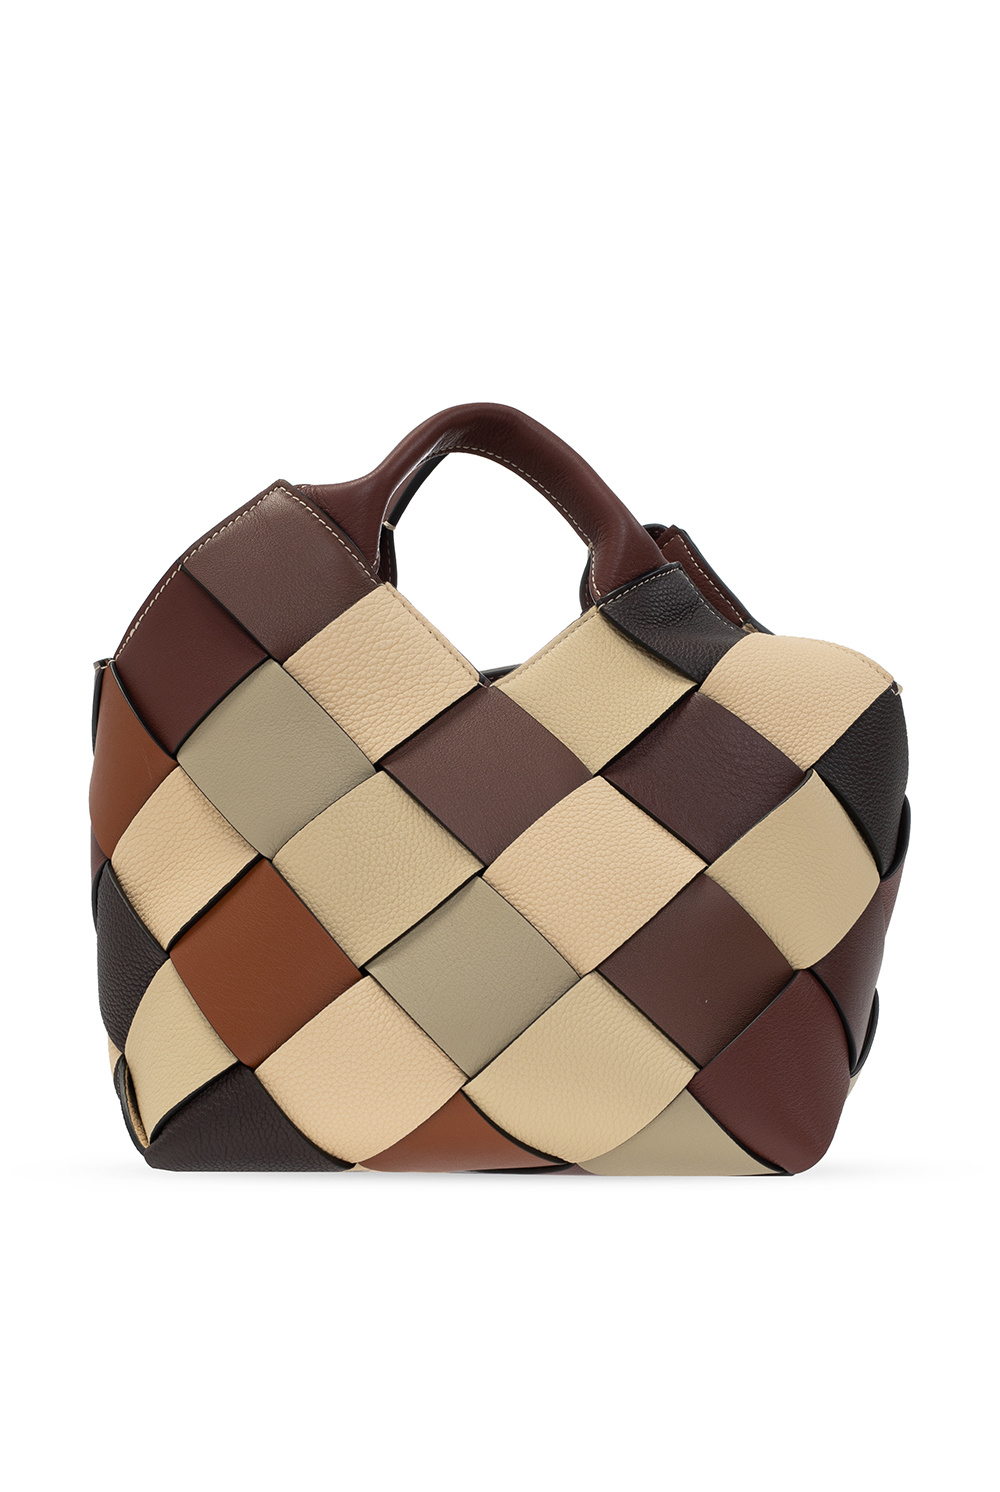 Meet the LOEWE BALLOON BAG: Design and Function, PROS and CONS